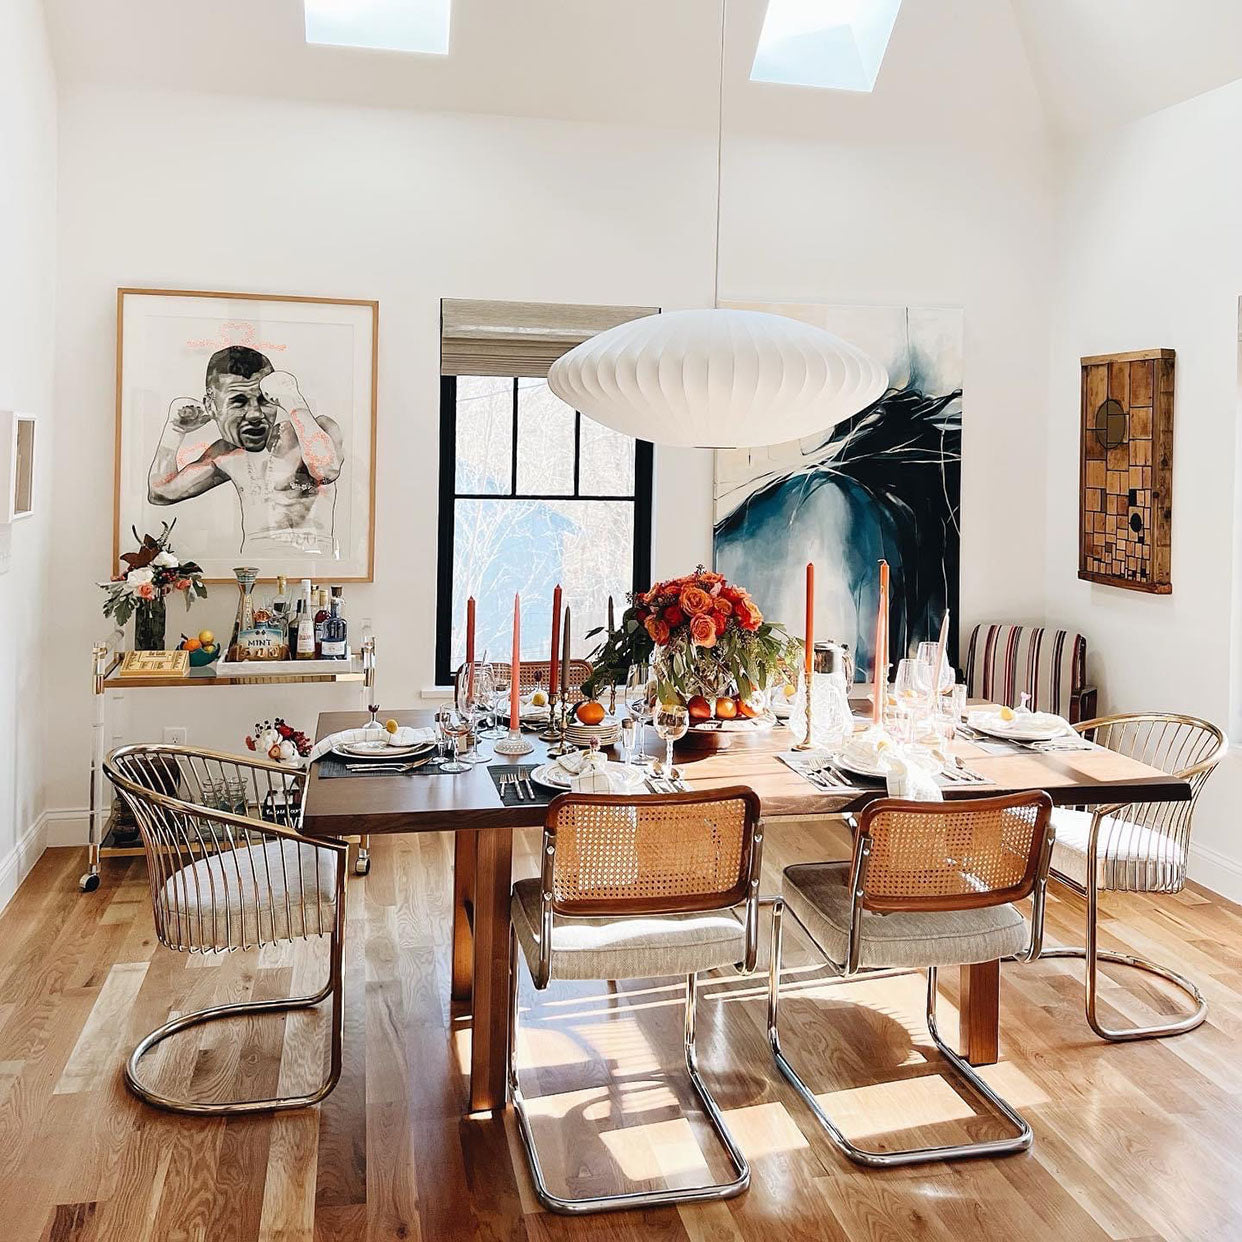 Vintage pieces in a modern dining room